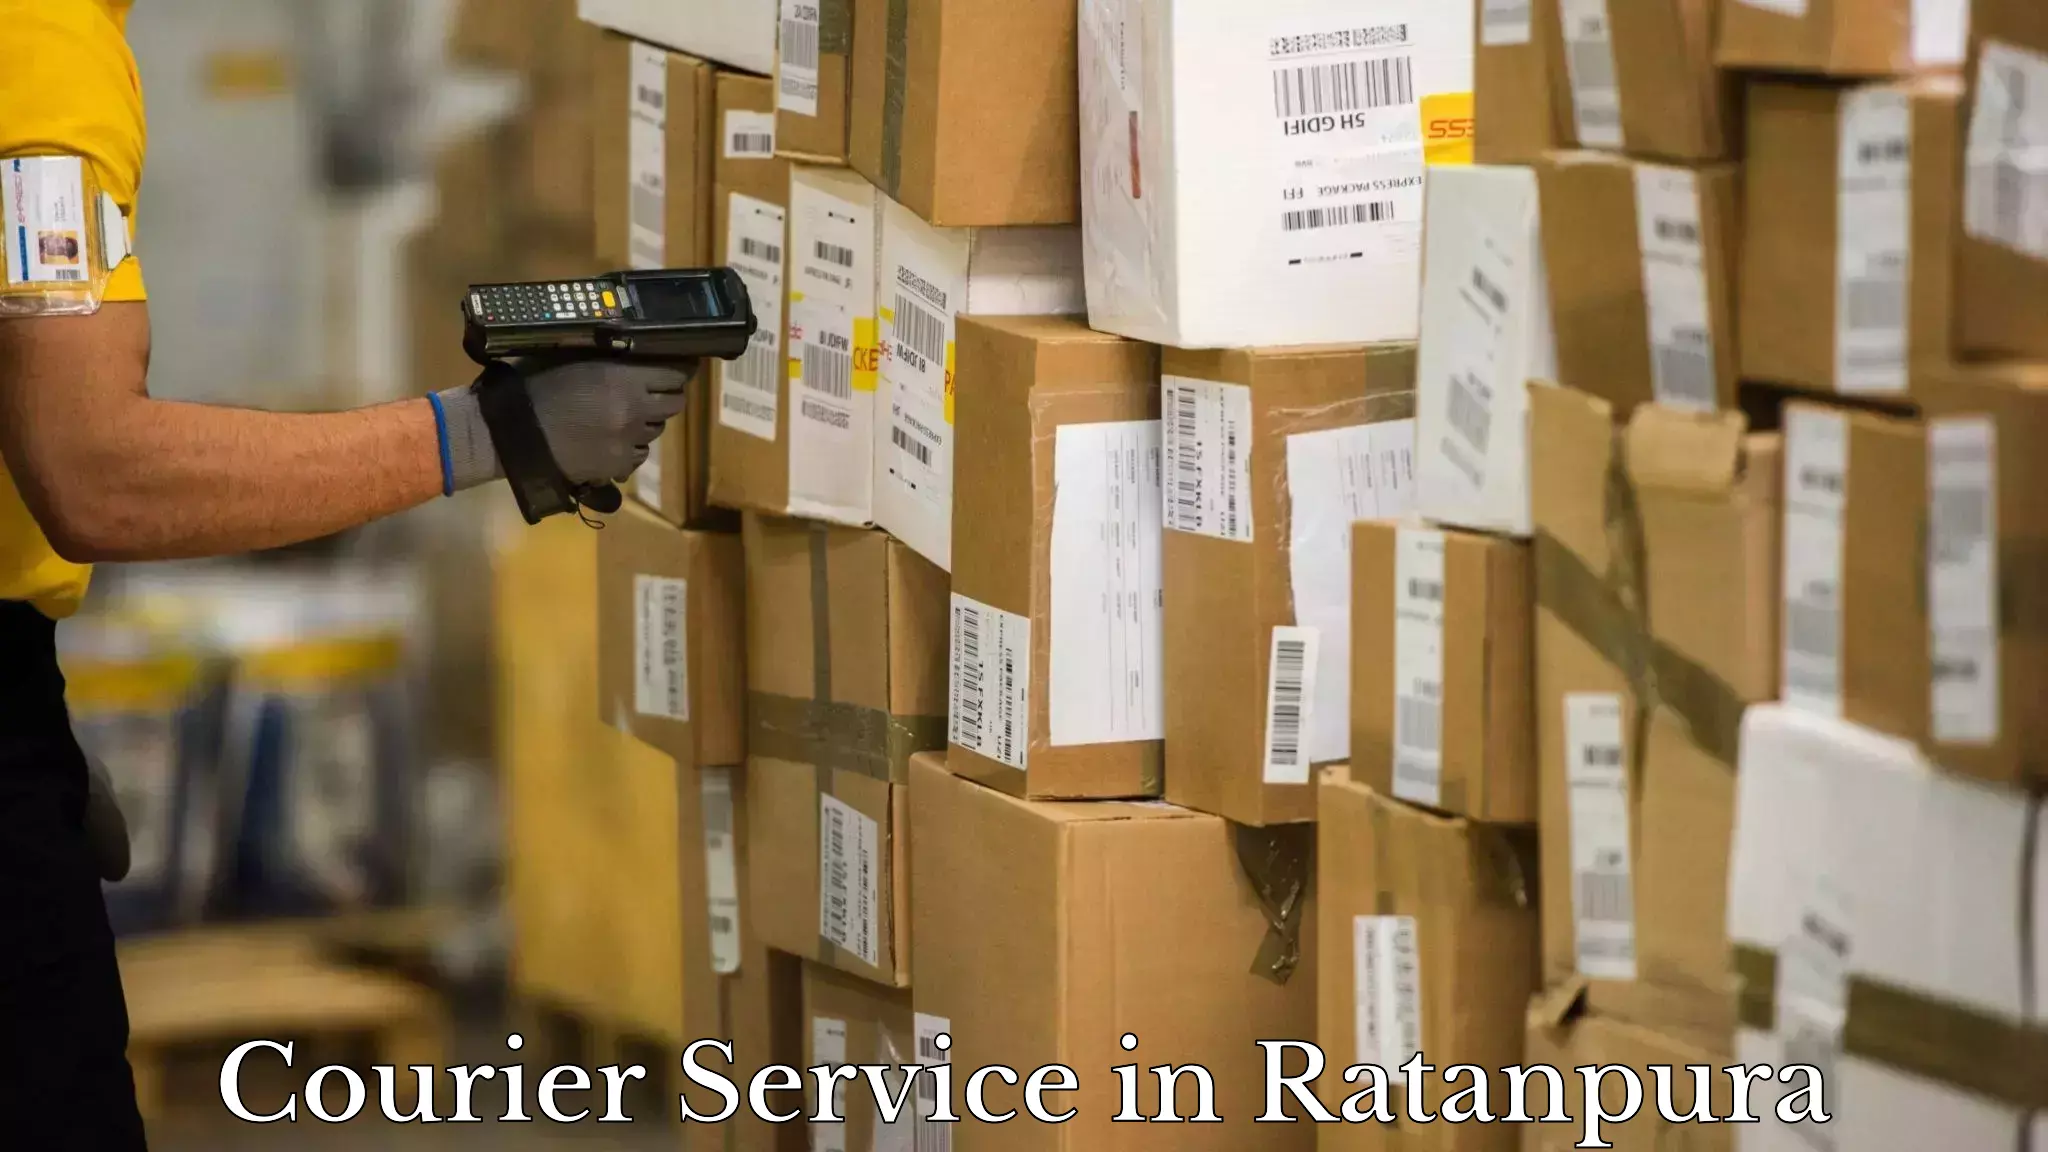 User-friendly delivery service in Ratanpura